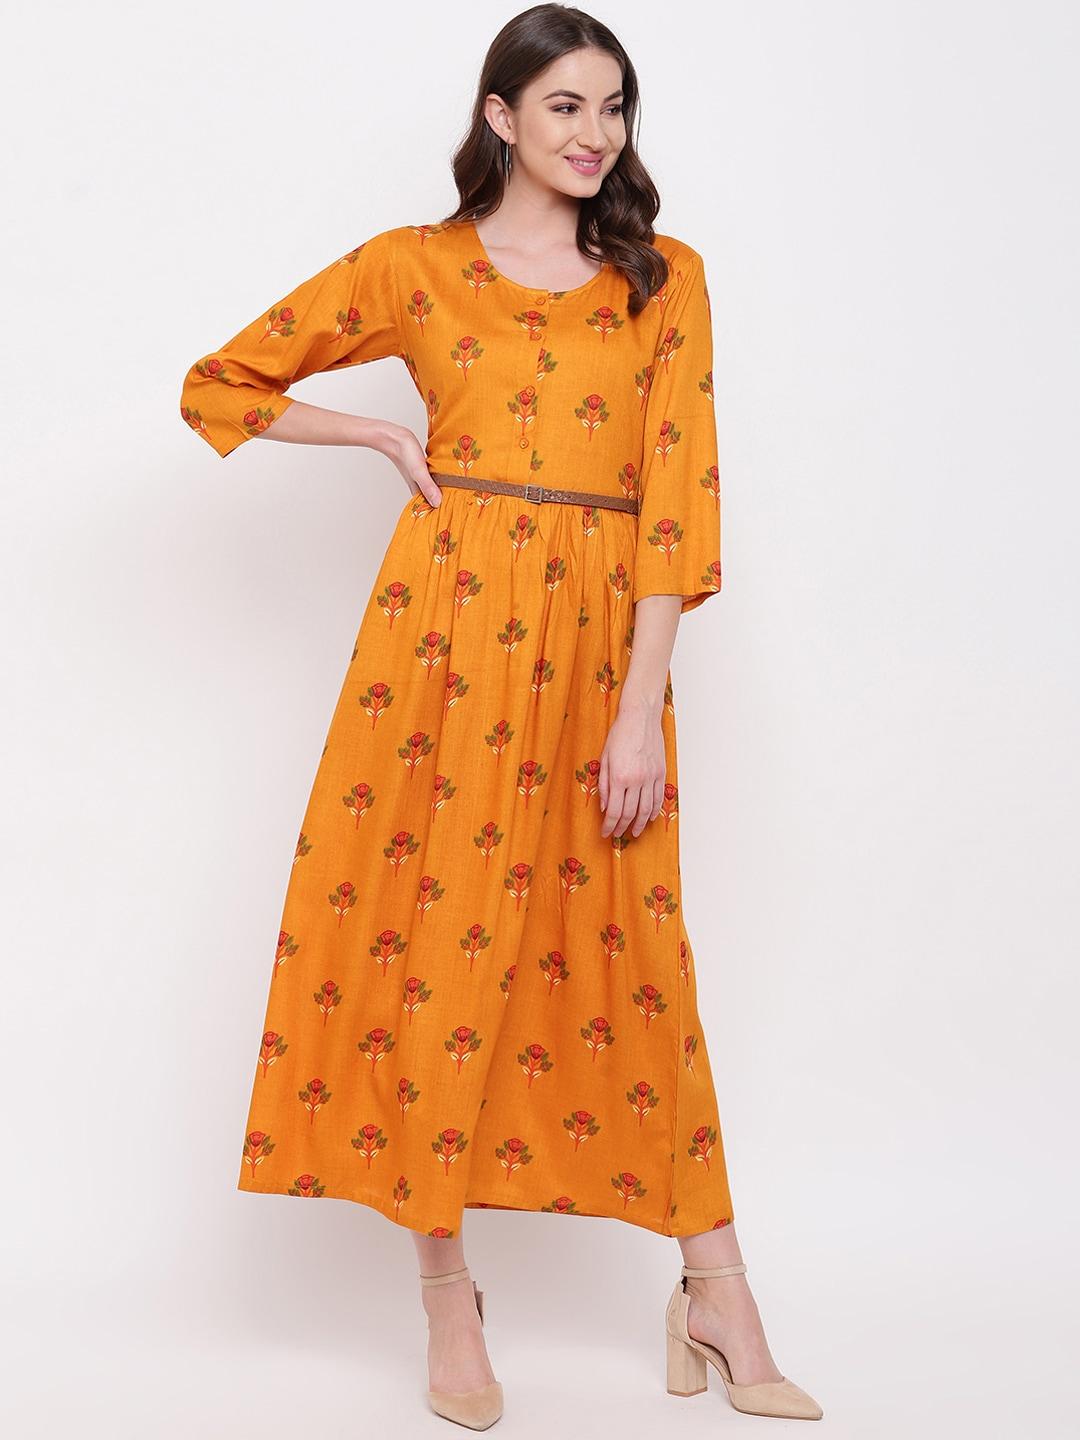 mayra-women-mustard-yellow-floral-print-fit-and-flare-dress